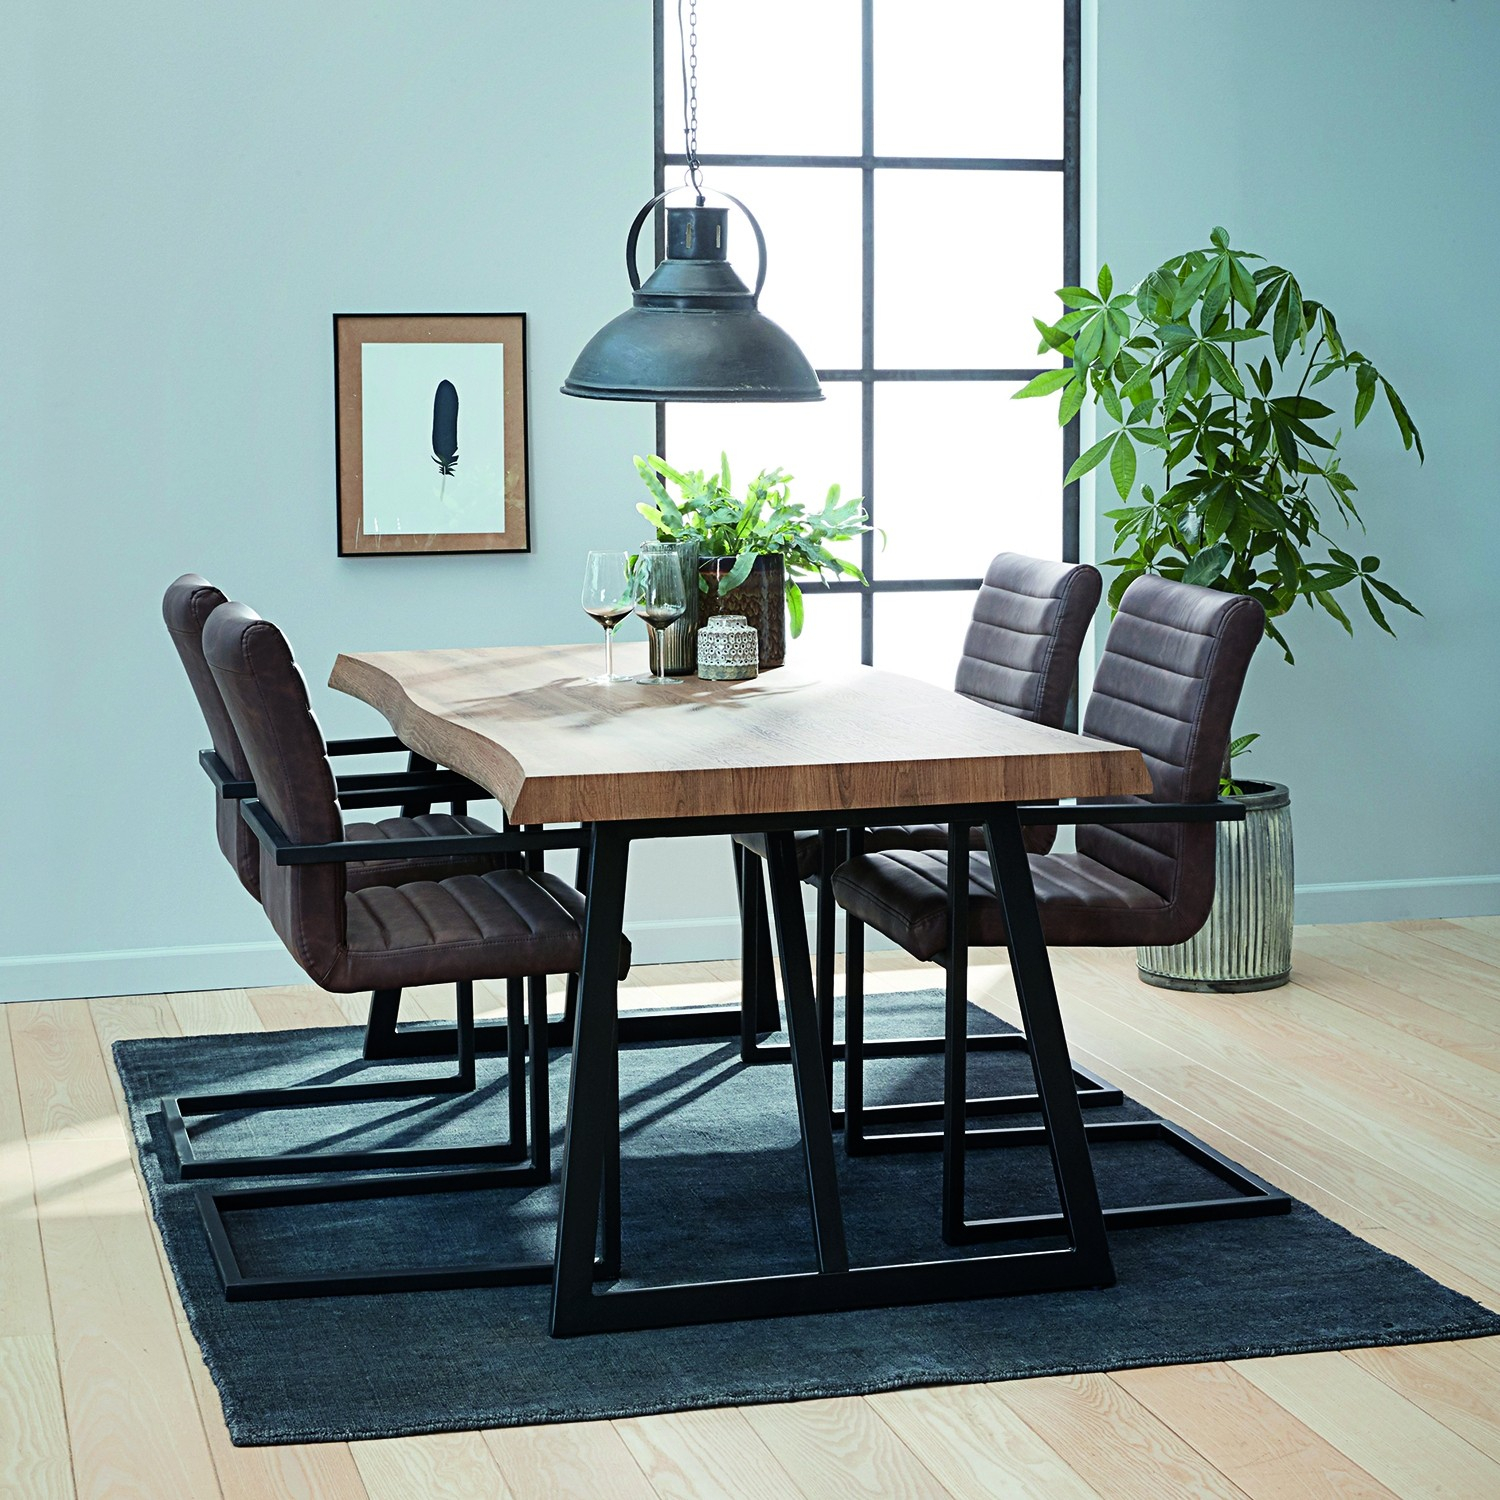 Casa Melbourne Table 4 Chairs Dining Set intended for proportions 1500 X 1500